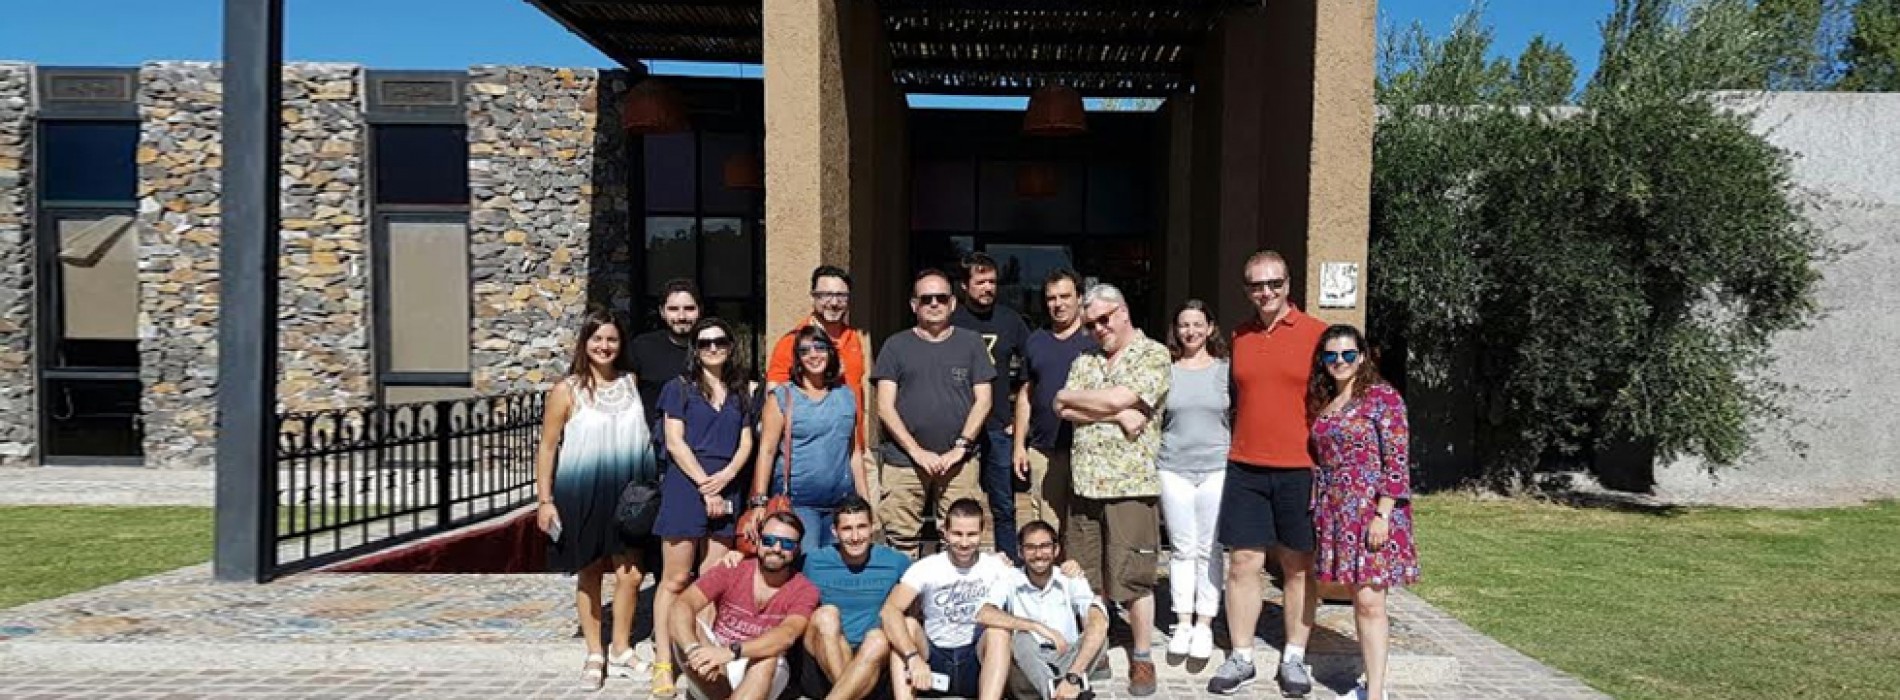 International journalists toured Mendoza and Buenos Aires